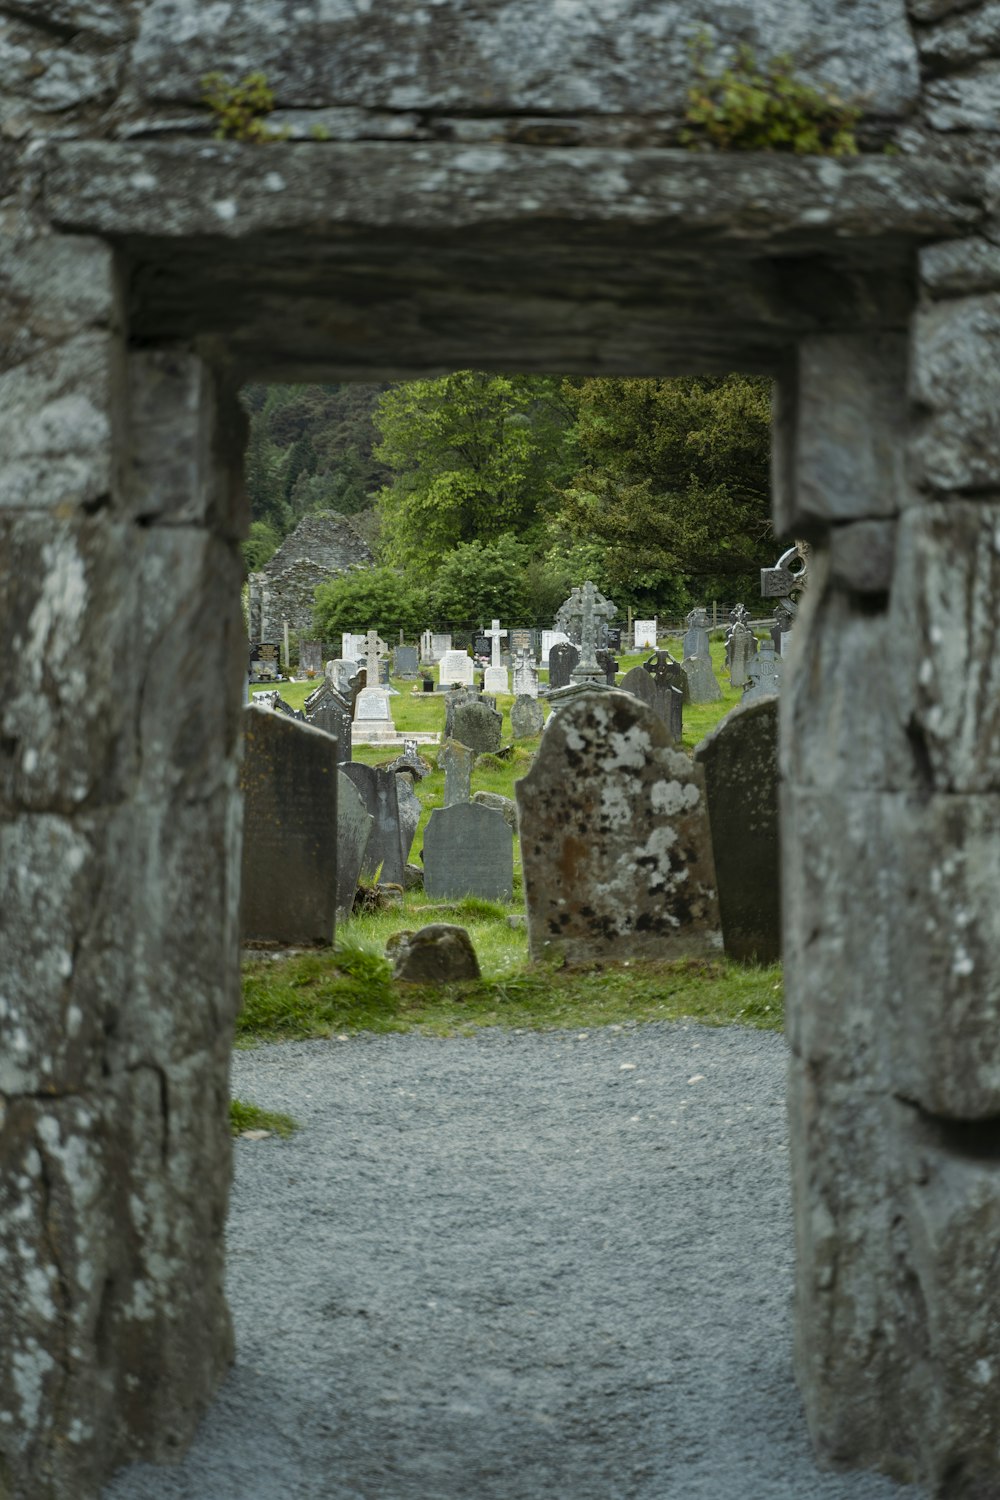 a cemetery with a stone archway leading into the cemetery